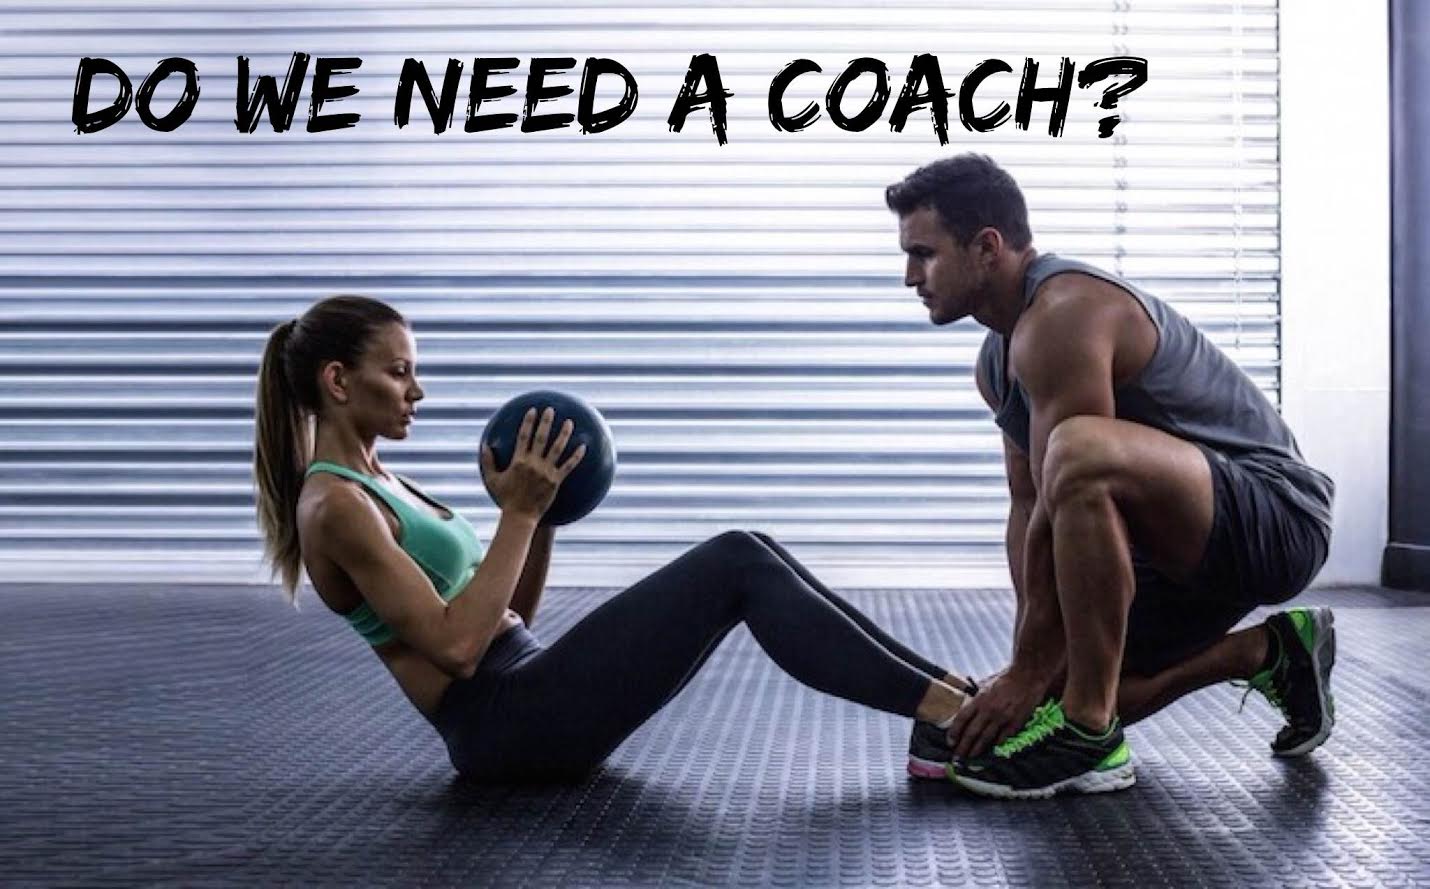 Should Personal Trainers Have Their Own Personal Trainer? 